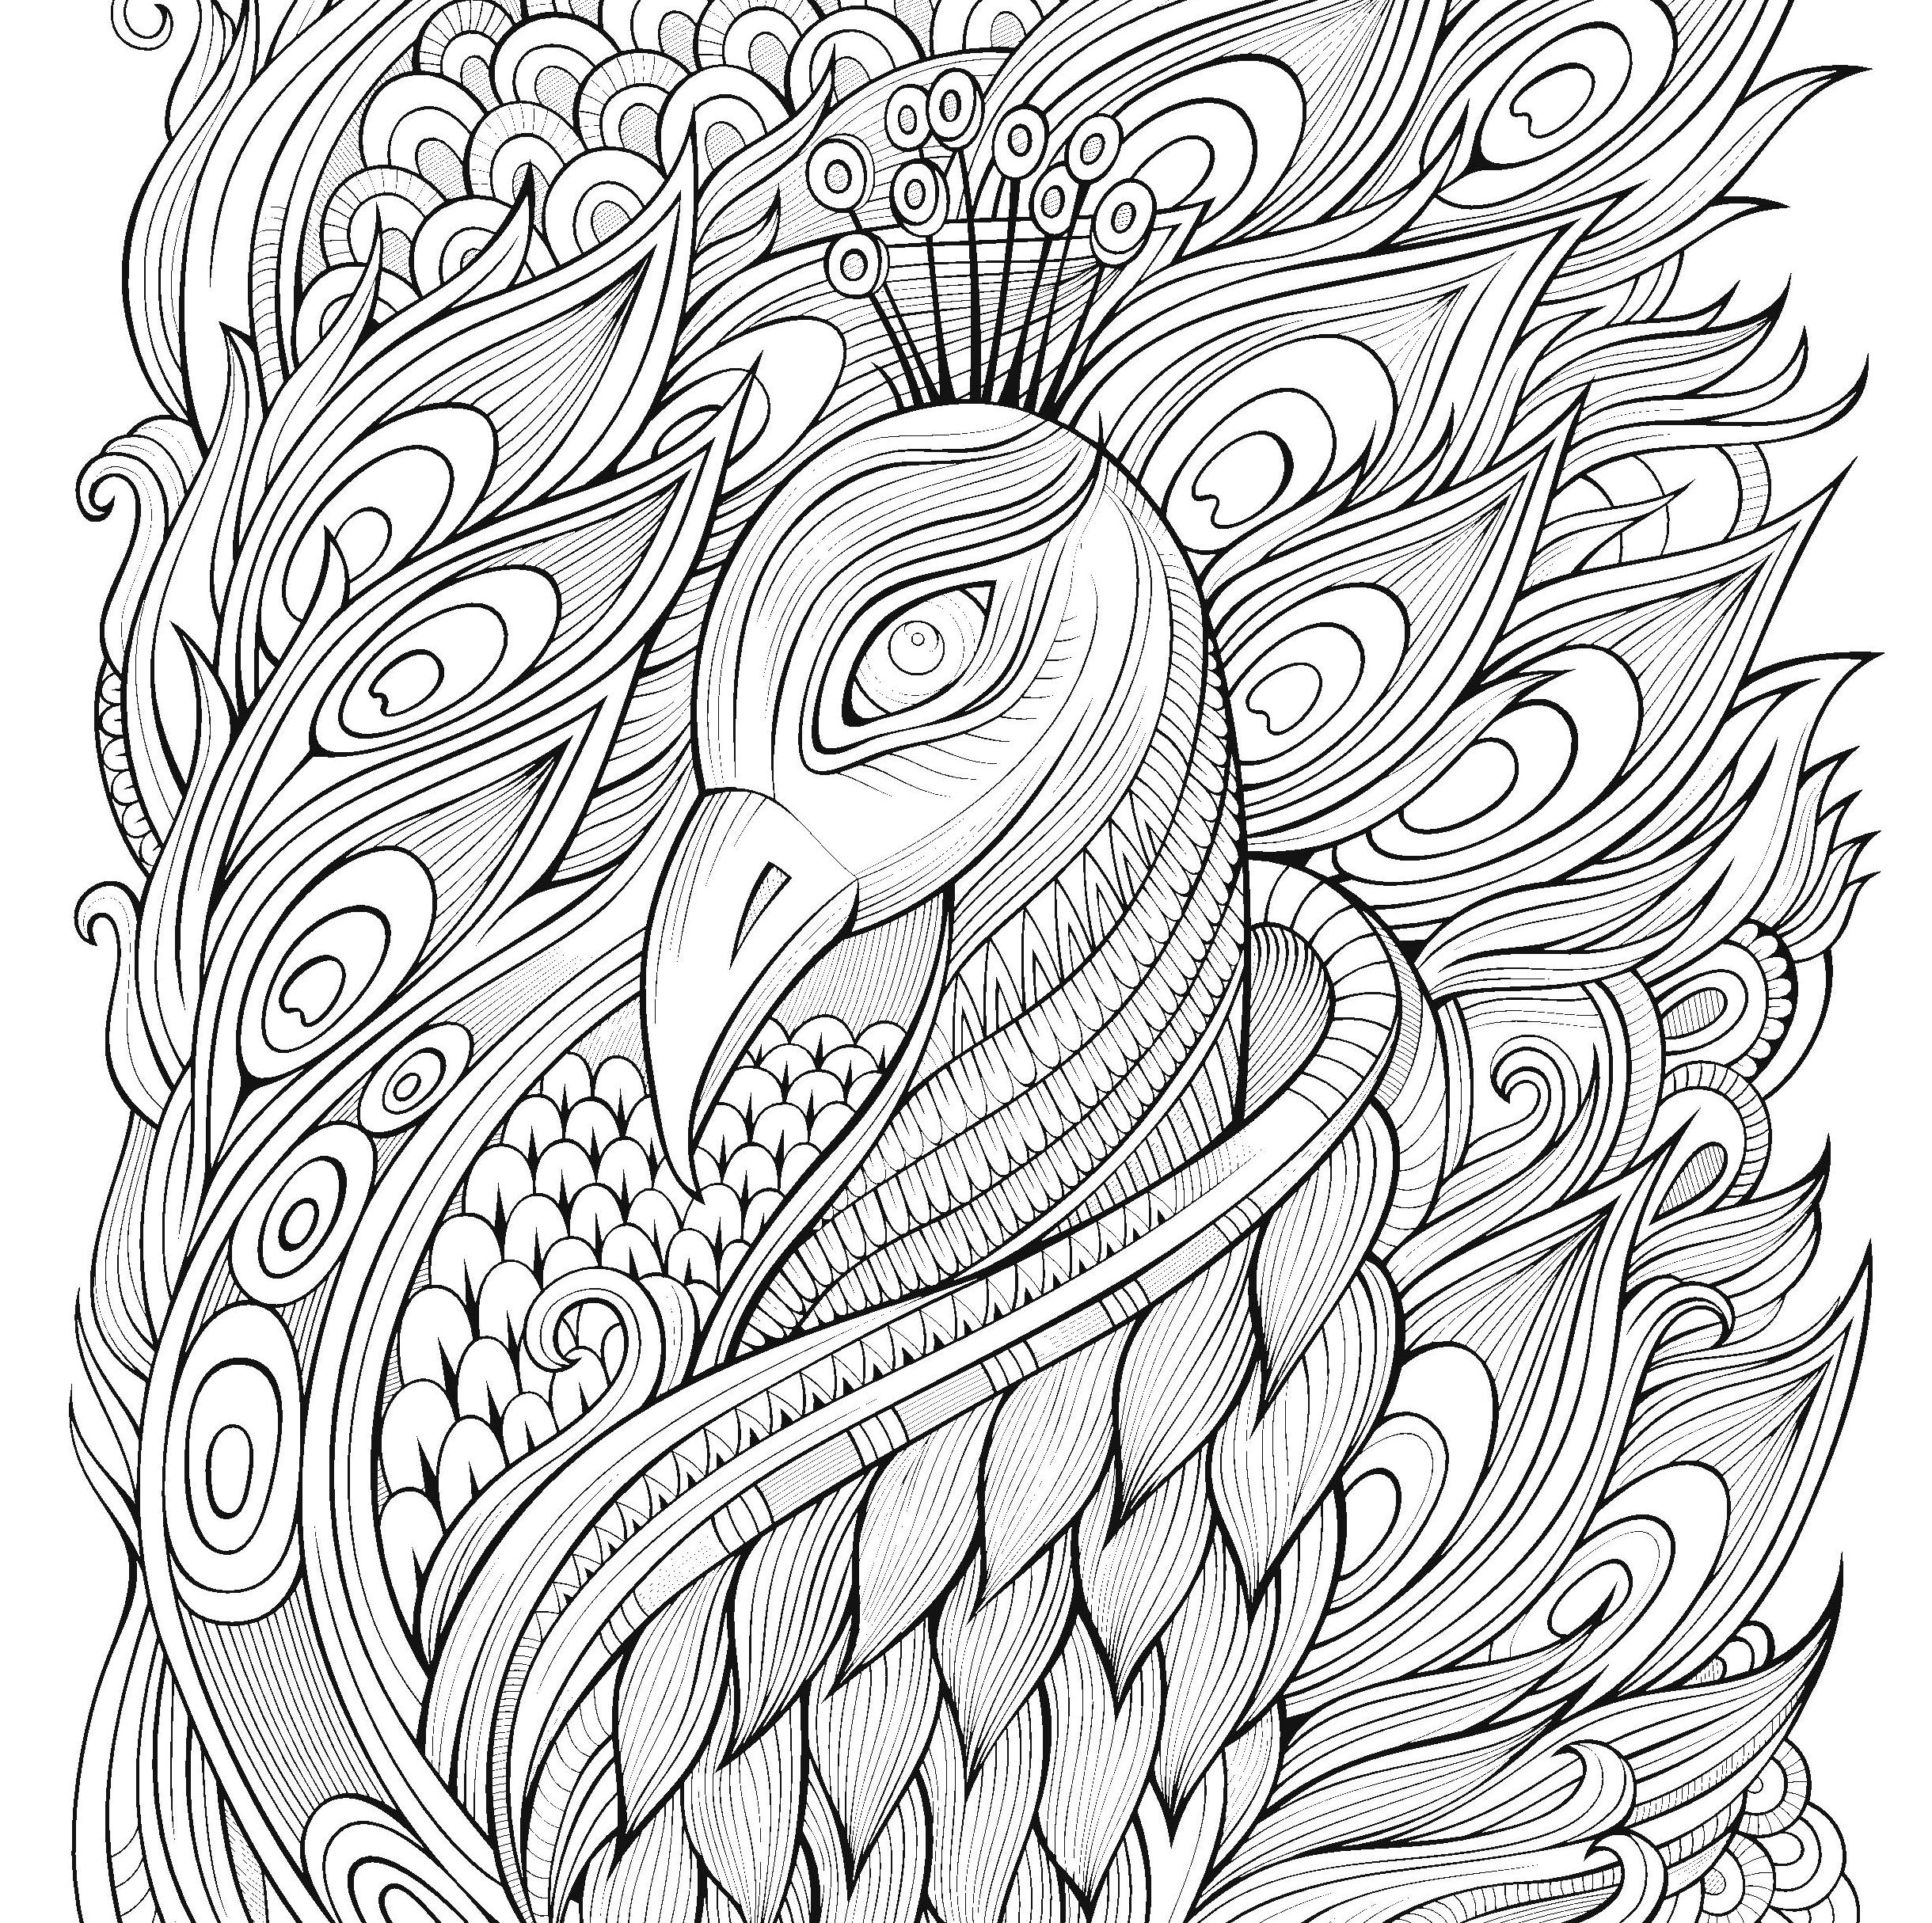 Download Anti-stress #126914 (Relaxation) - Printable coloring pages